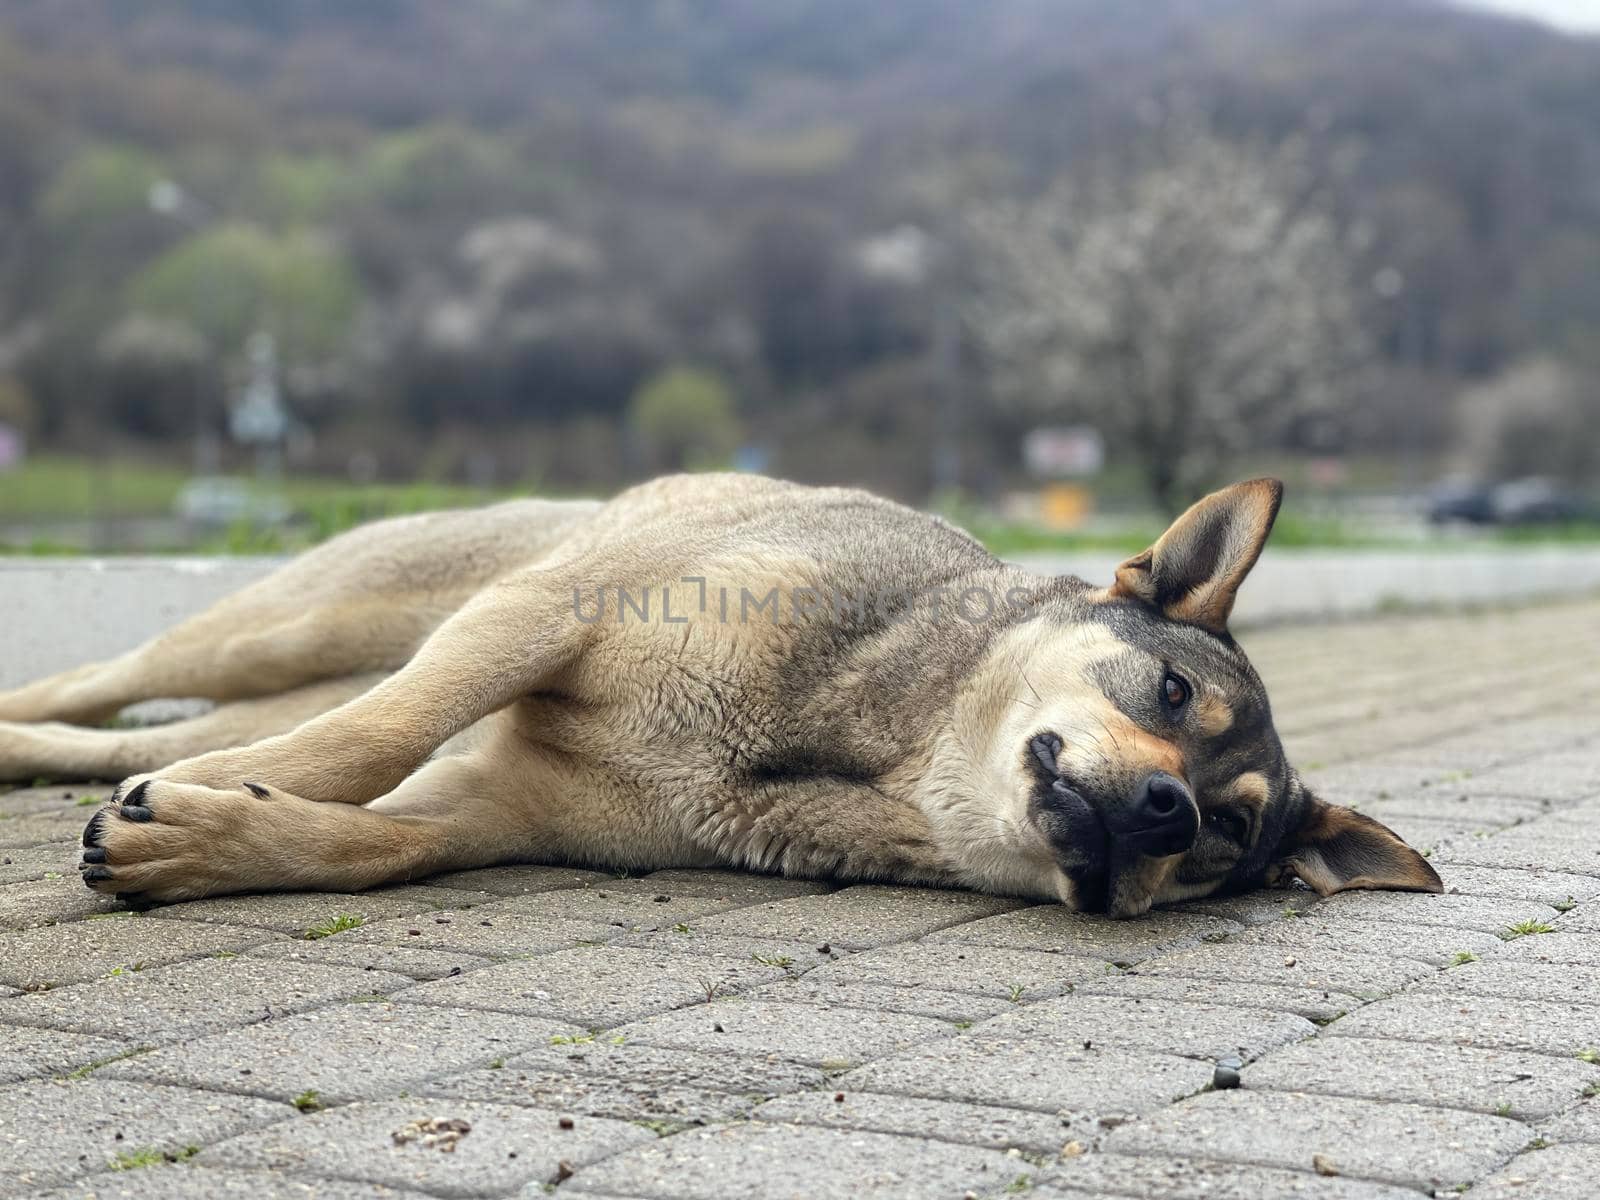 Close up of big dog lying on sidewalk. Cute domestic animal resting and looking away